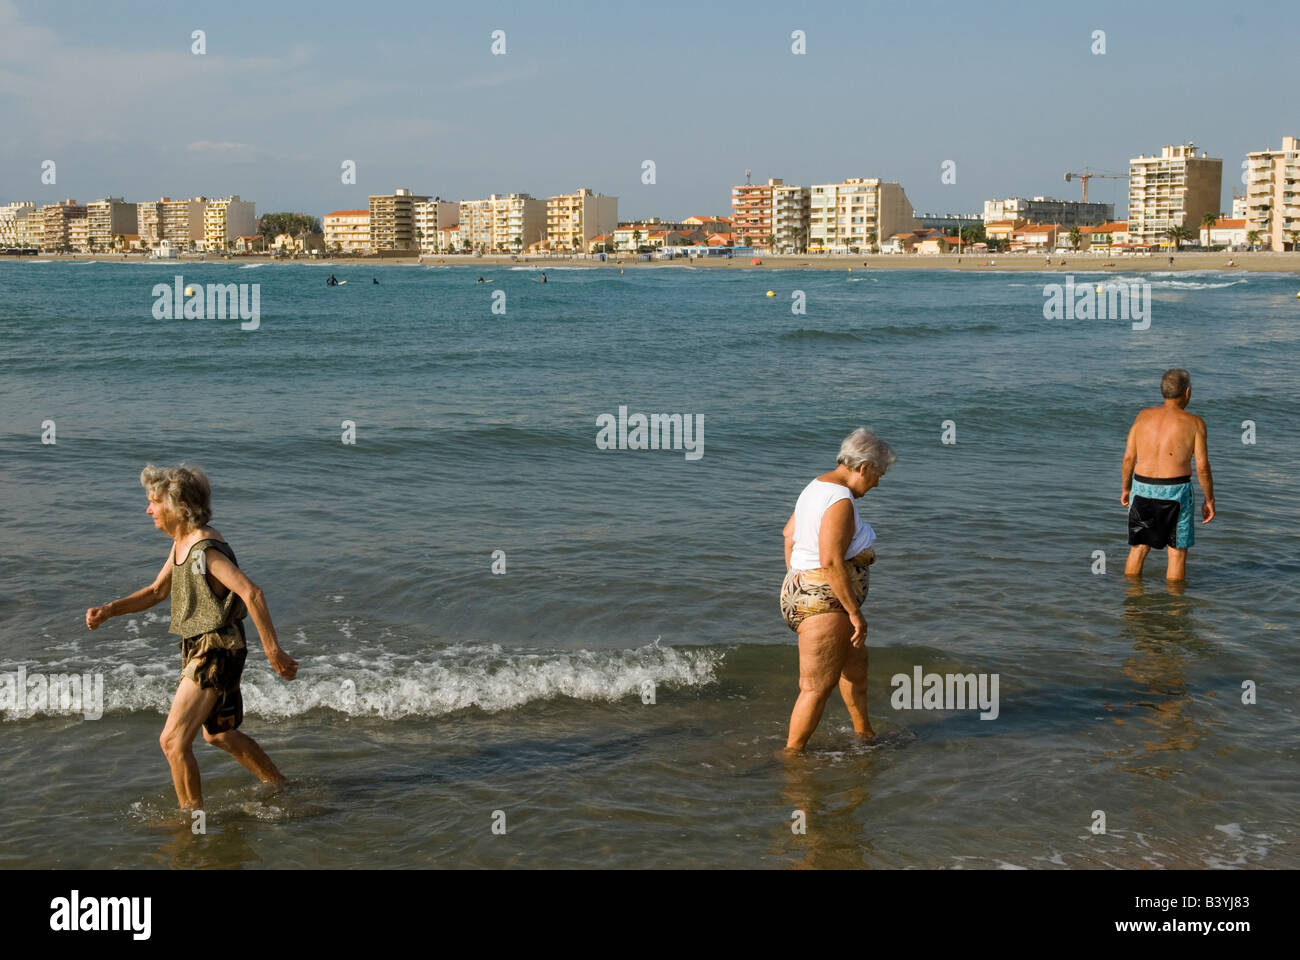 Canet Plage nr Perpignan South of France Beach scene walking through sea for exercise Stock Photo